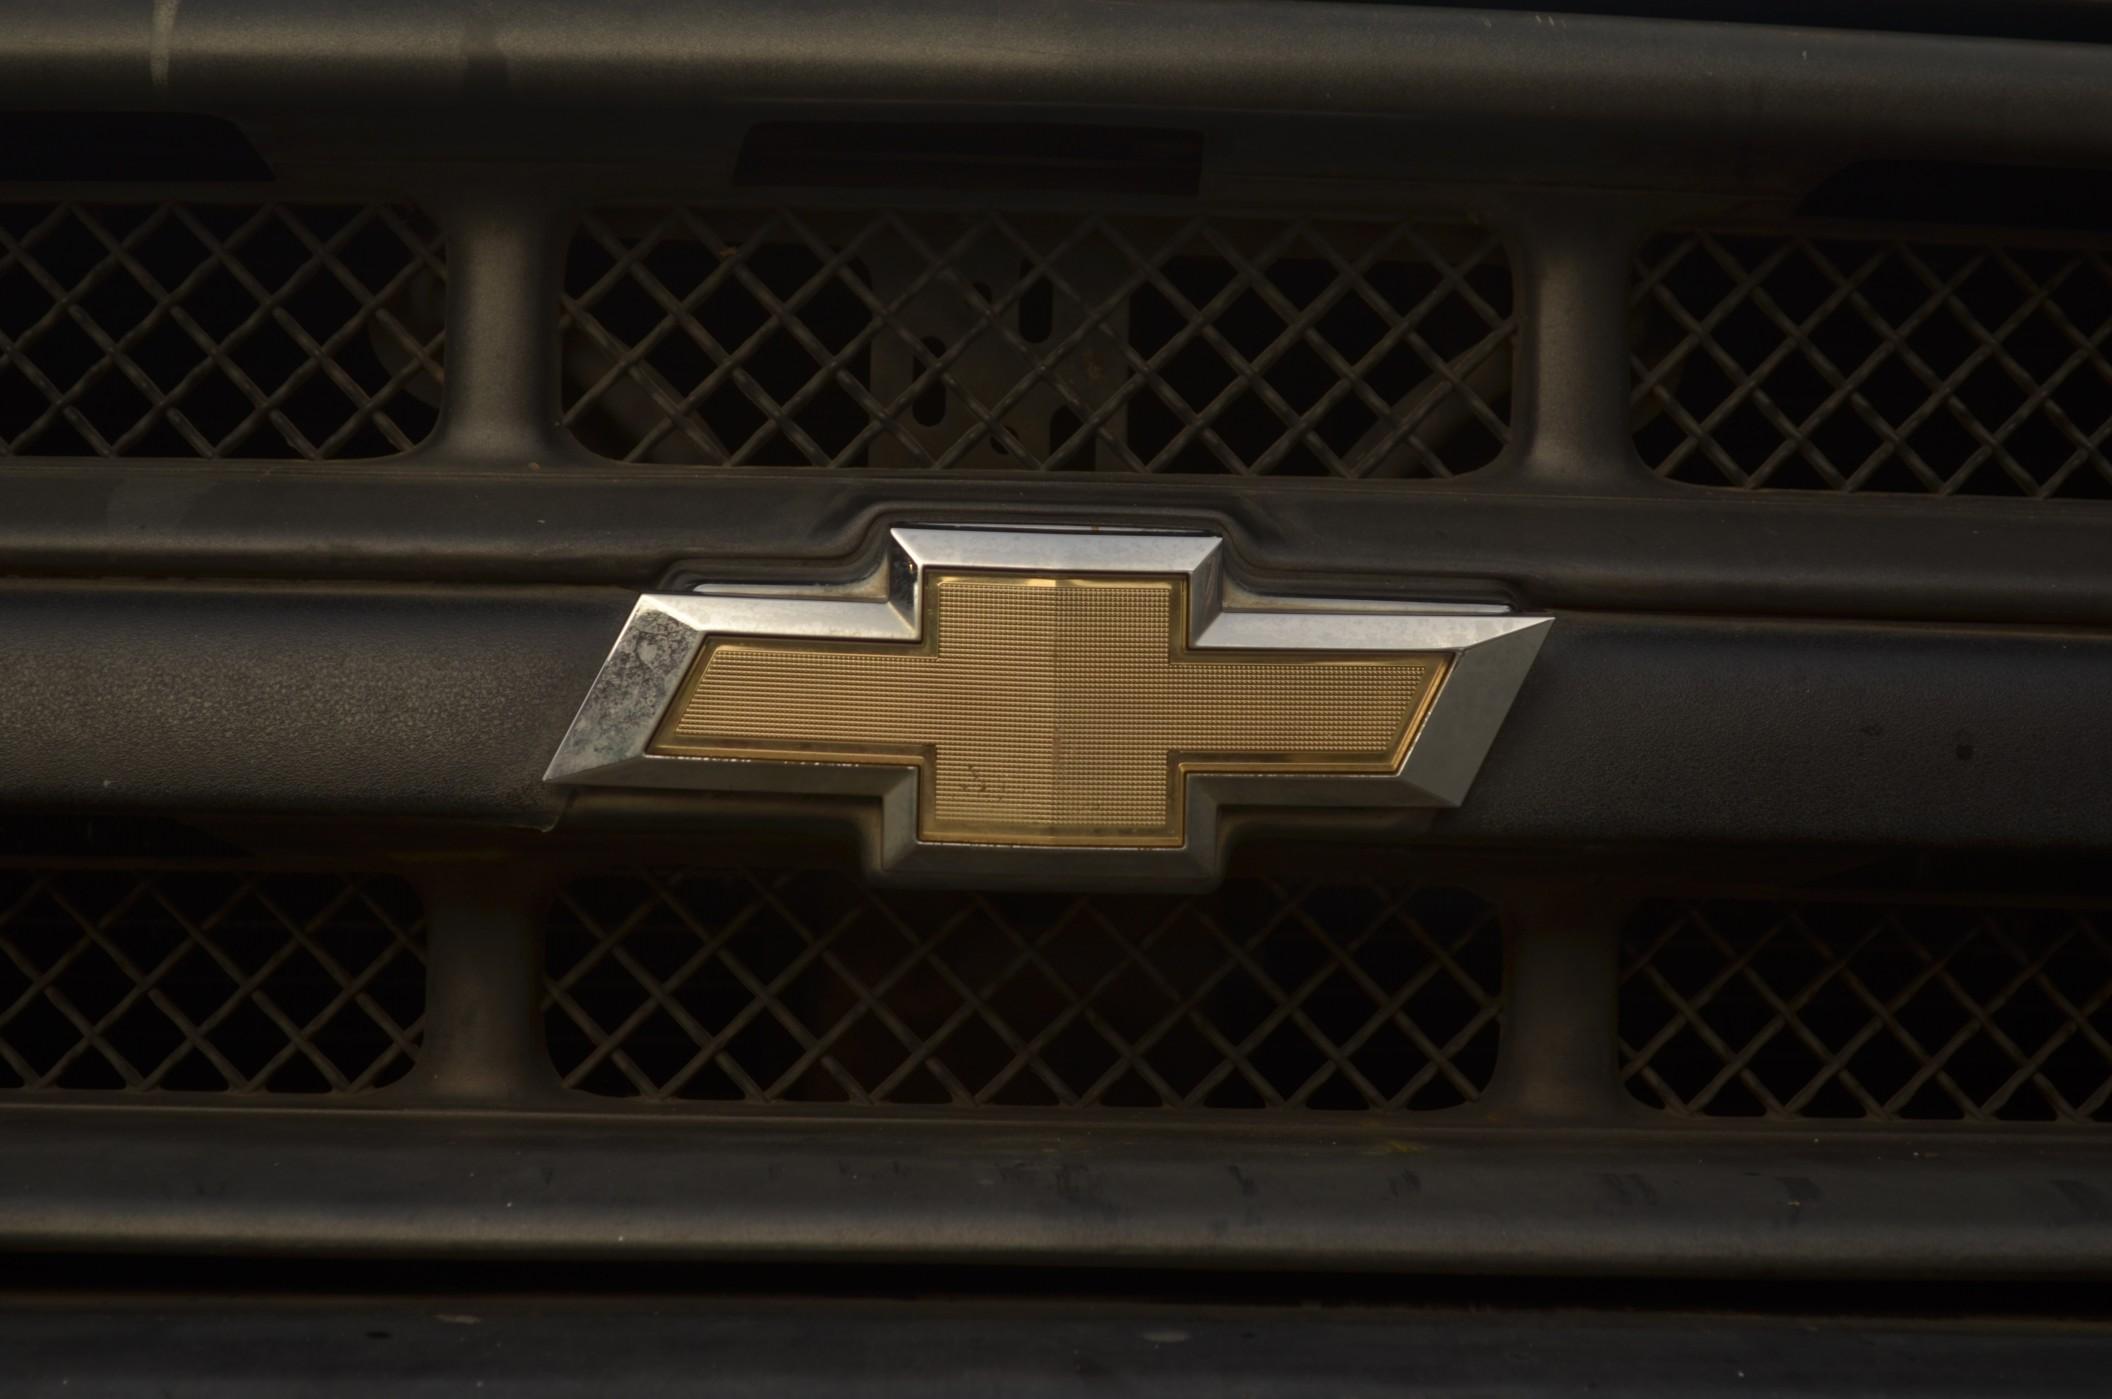 Chevrolet has a massive lineup of cars, trucks, and SUVs.